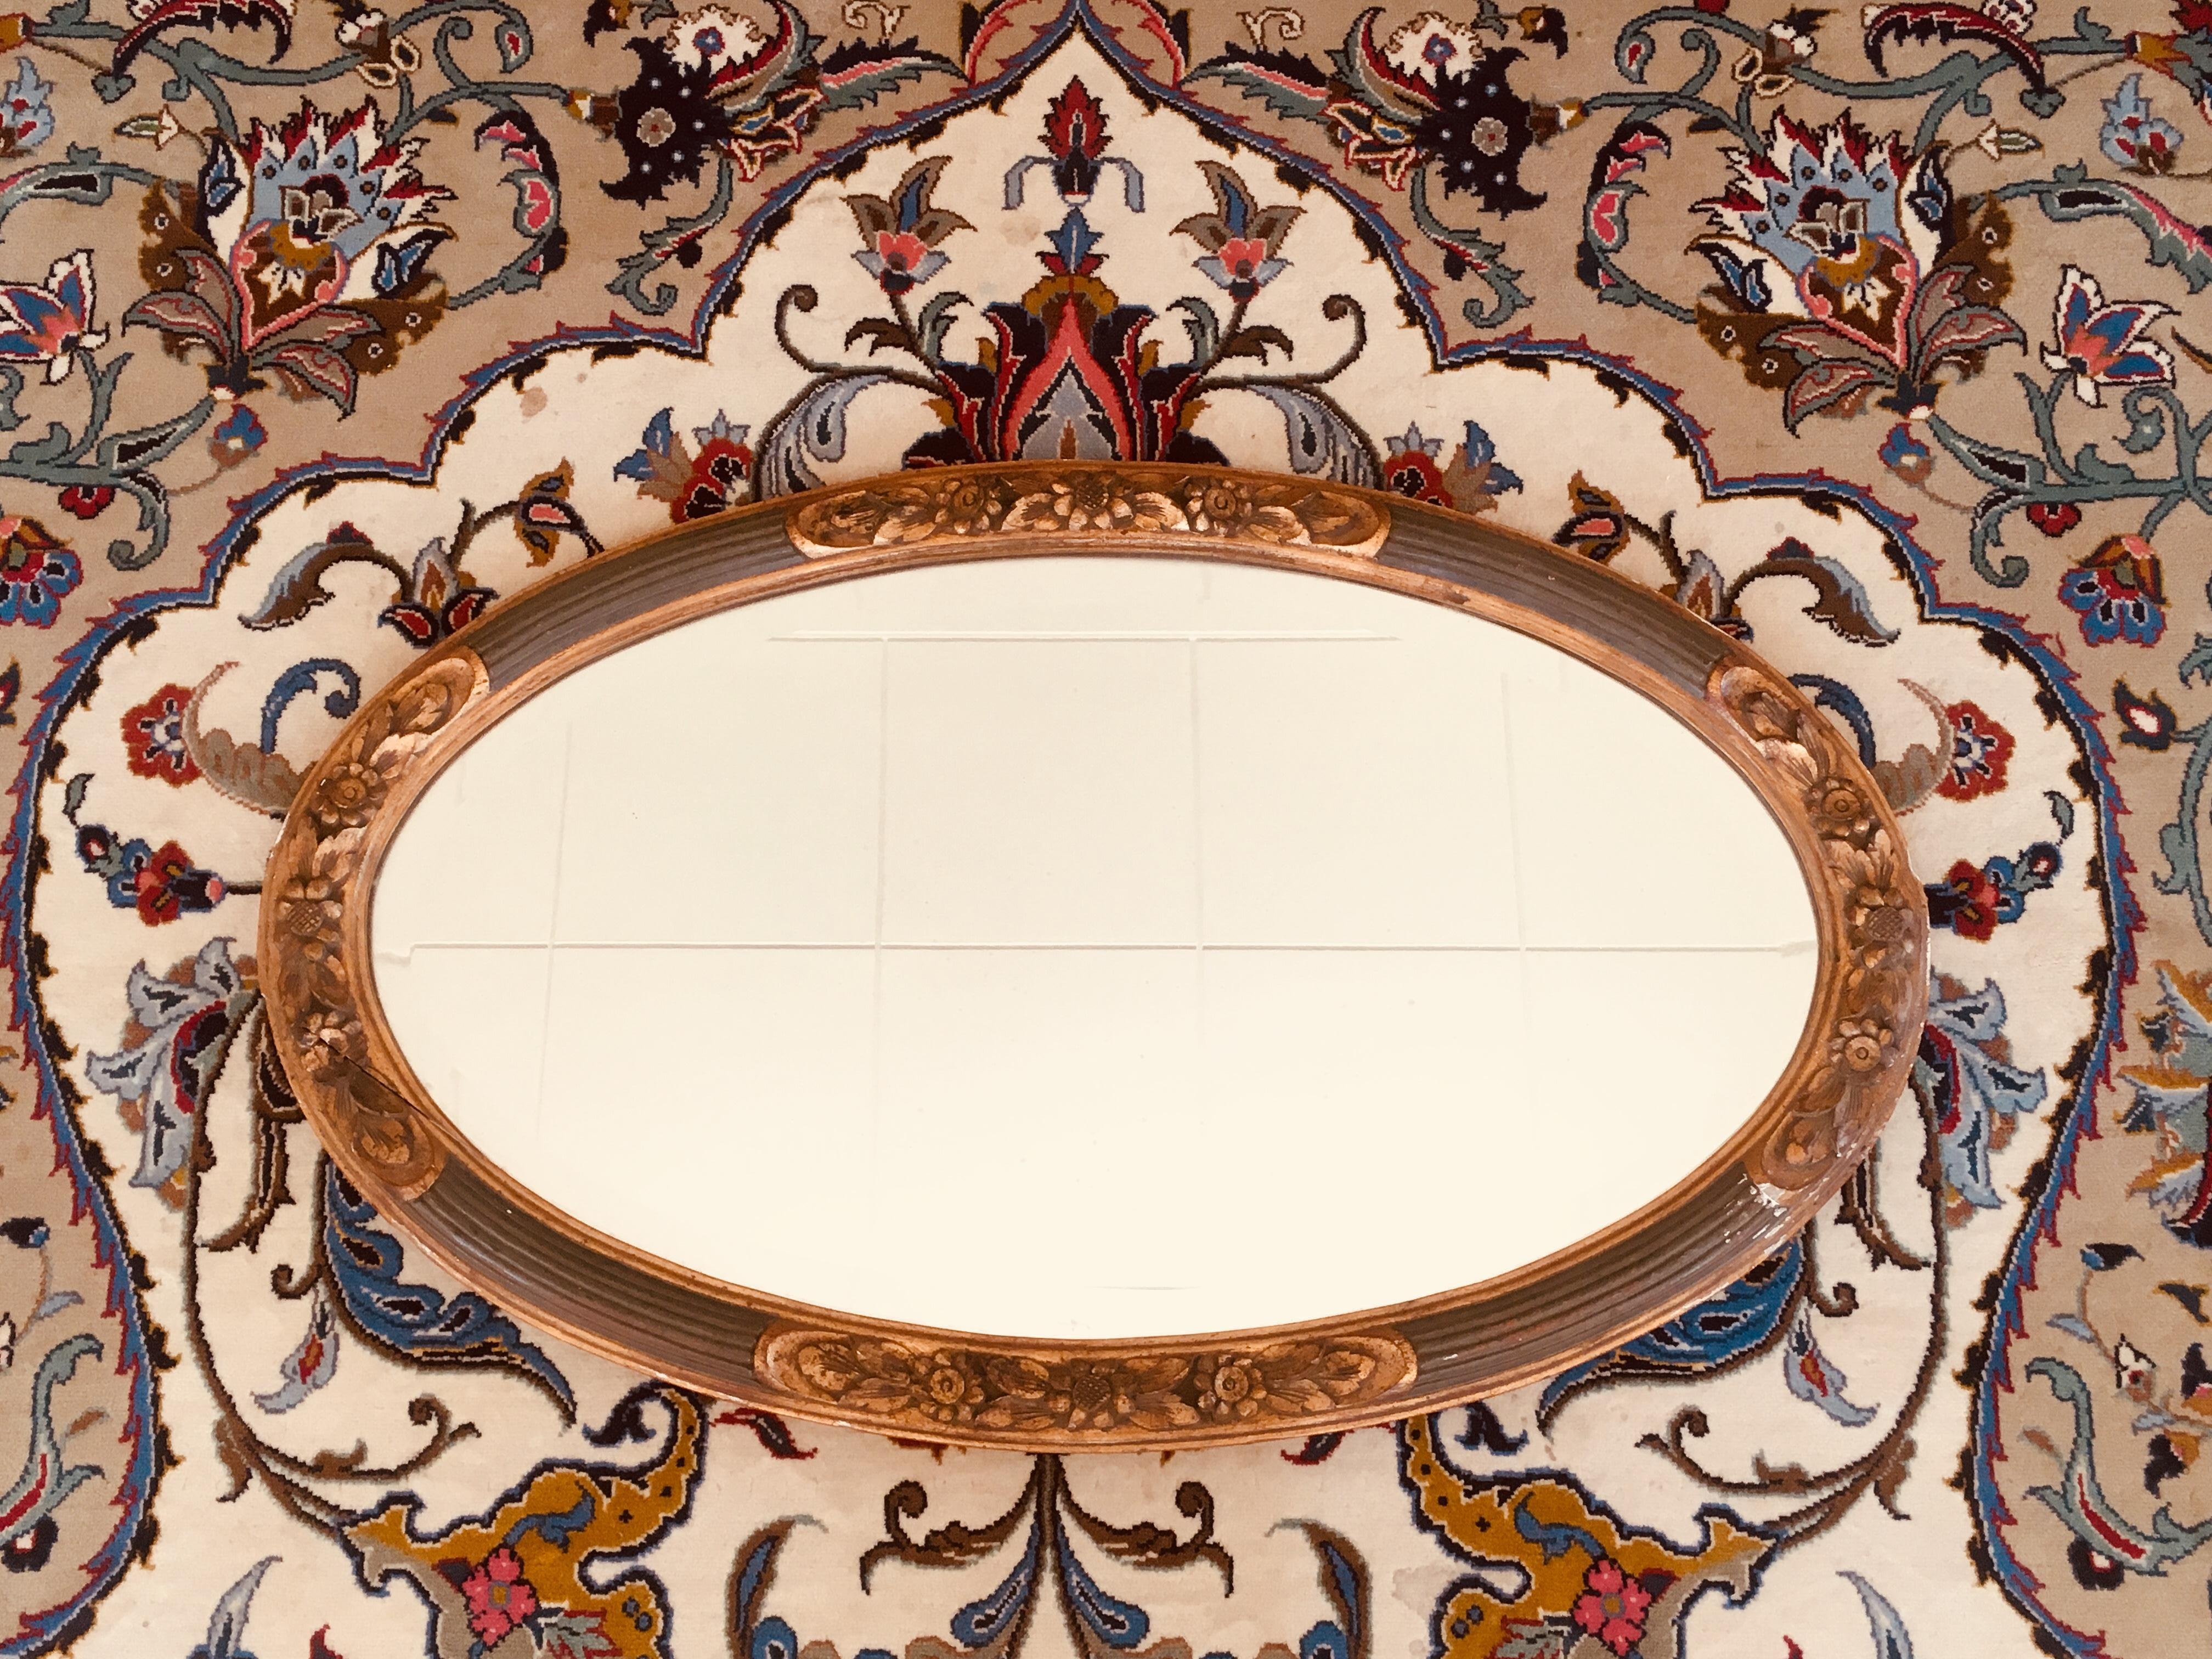 Large oval hand-painted giltwood mirror with original crystal glass by Louis SÜE and André MARE, France, circa 1920.